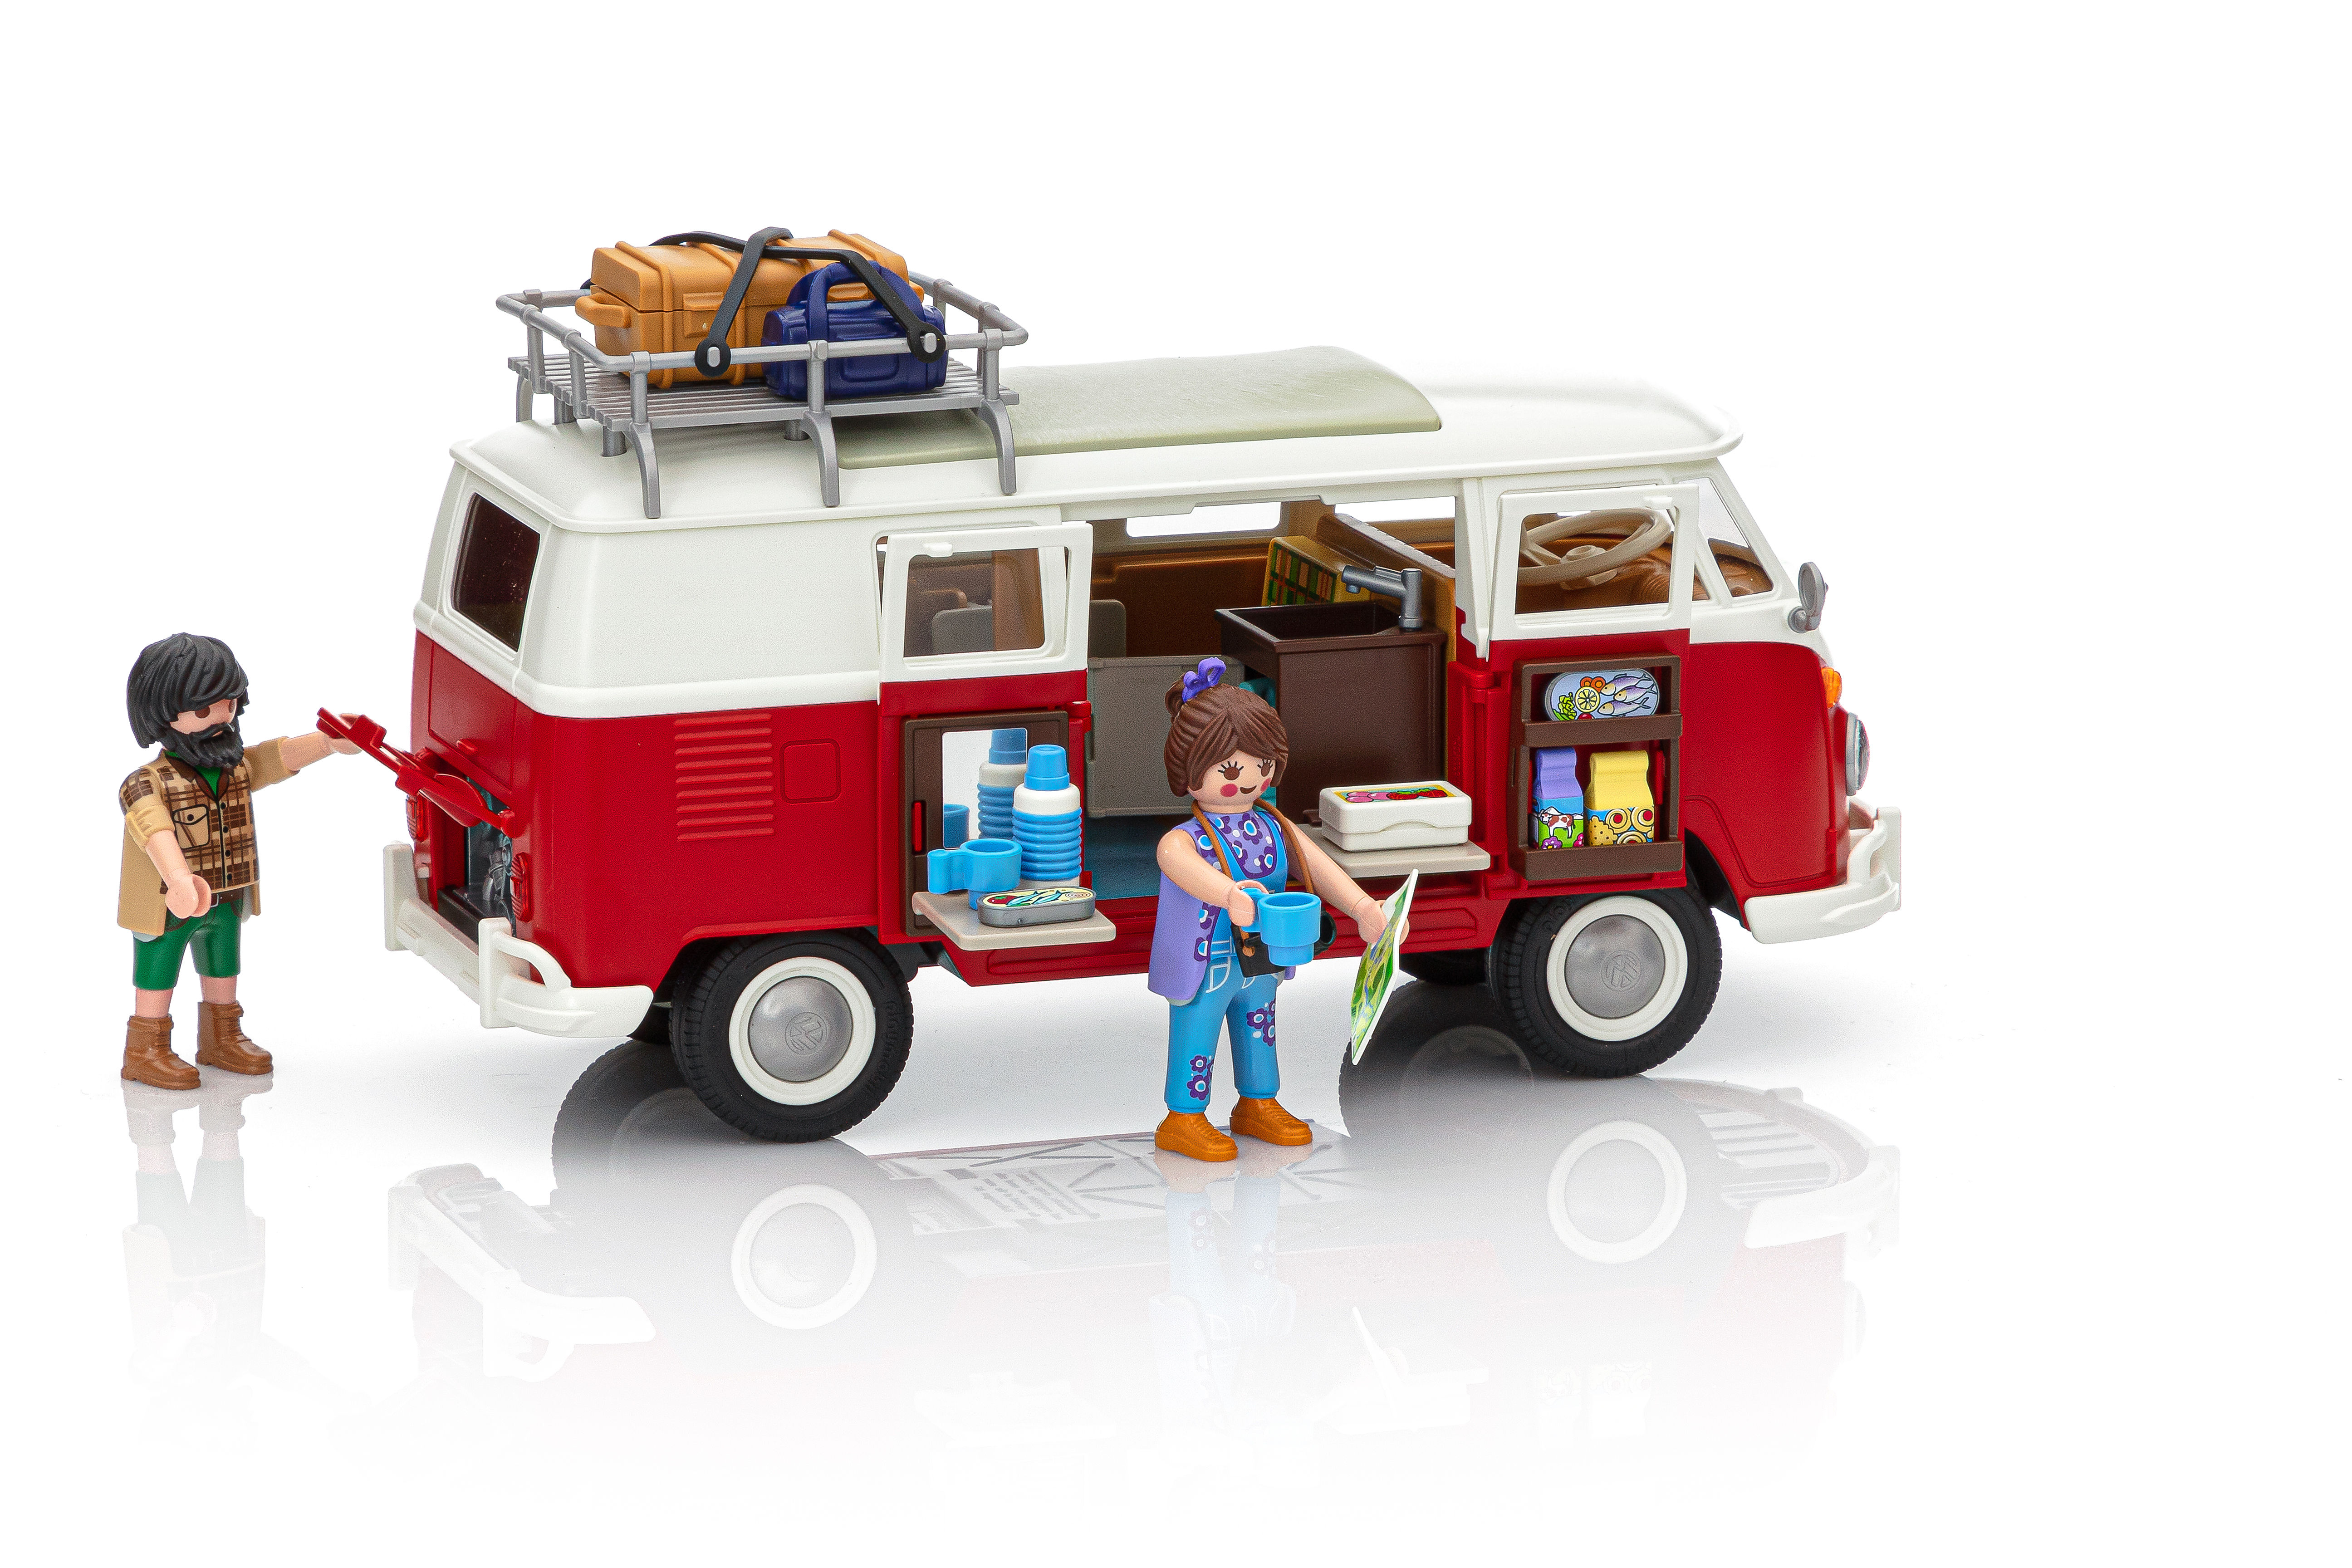 Playmobil Volkswagen Camping Bus, Edition spéciale